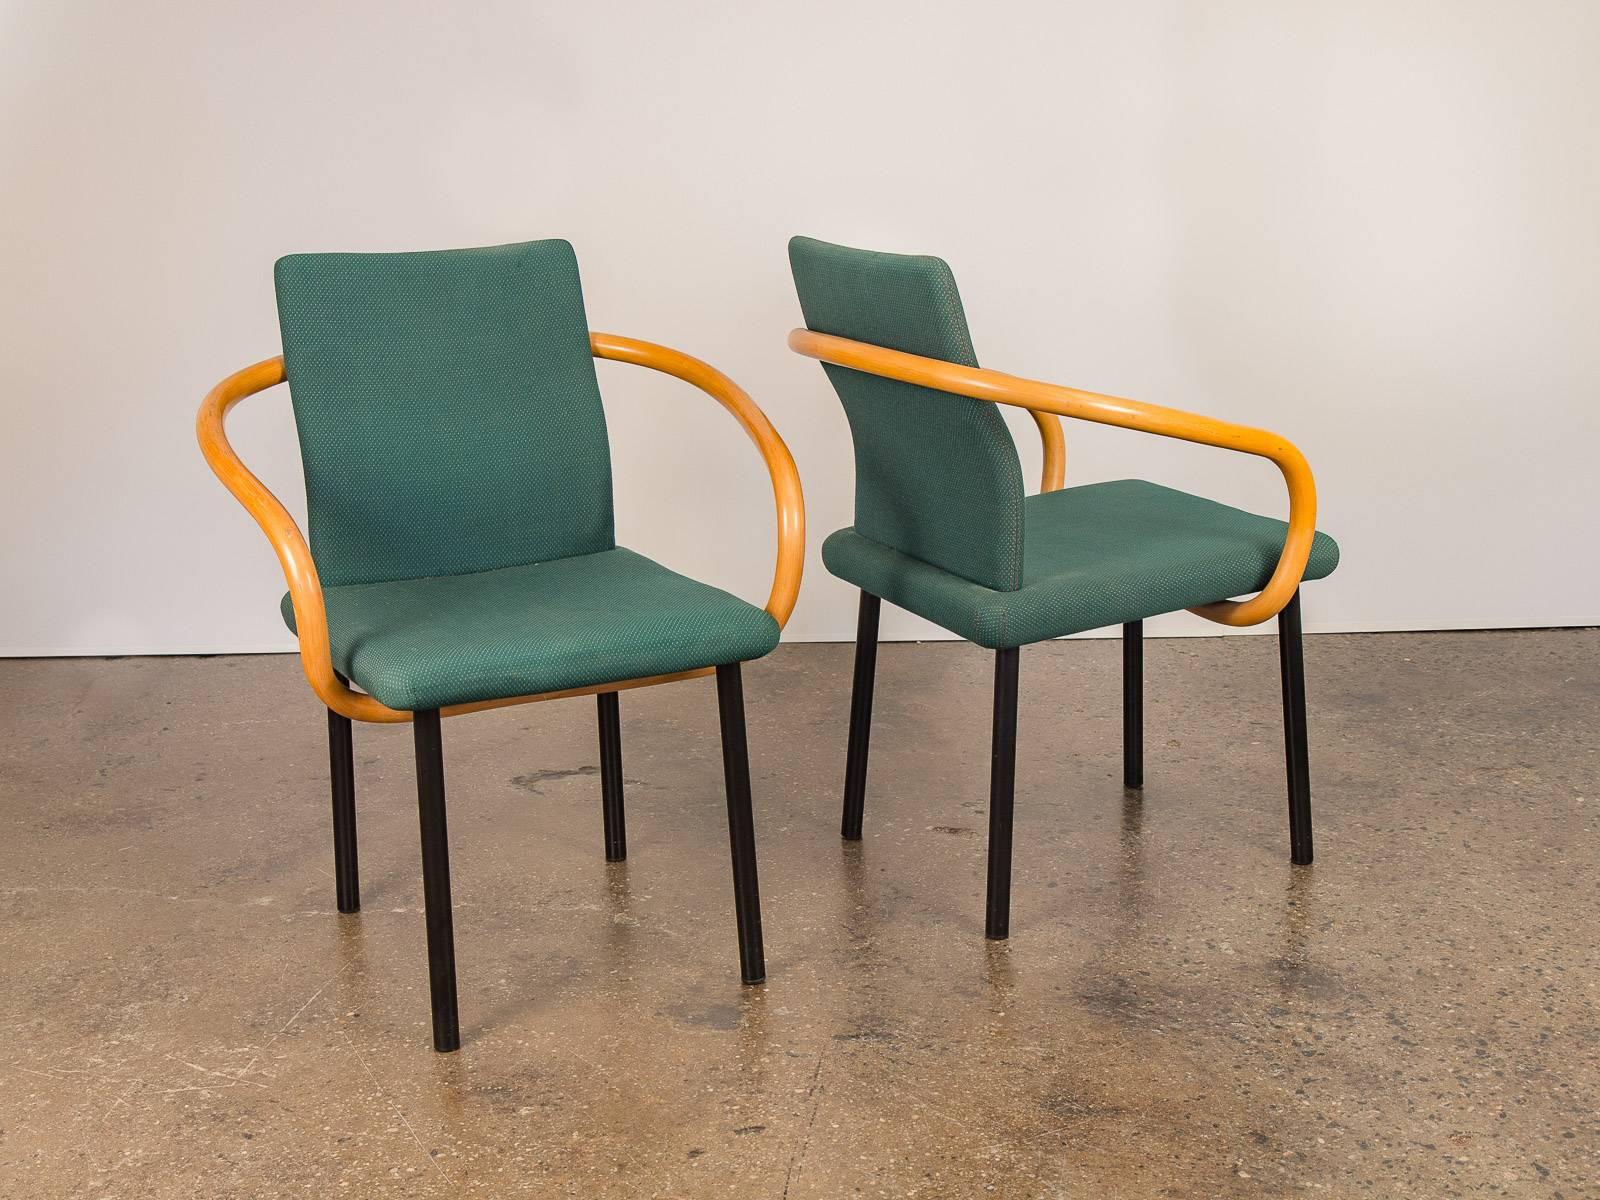 Pair of Ettore Sottsass Mandarin chairs for Knoll Studio designed in 1986. Steel frame and legs sustain the forest green cushions and wrapping cylindrical wooden arms. Fabric is worn but presentable. A reminder of the Memphis founder’s